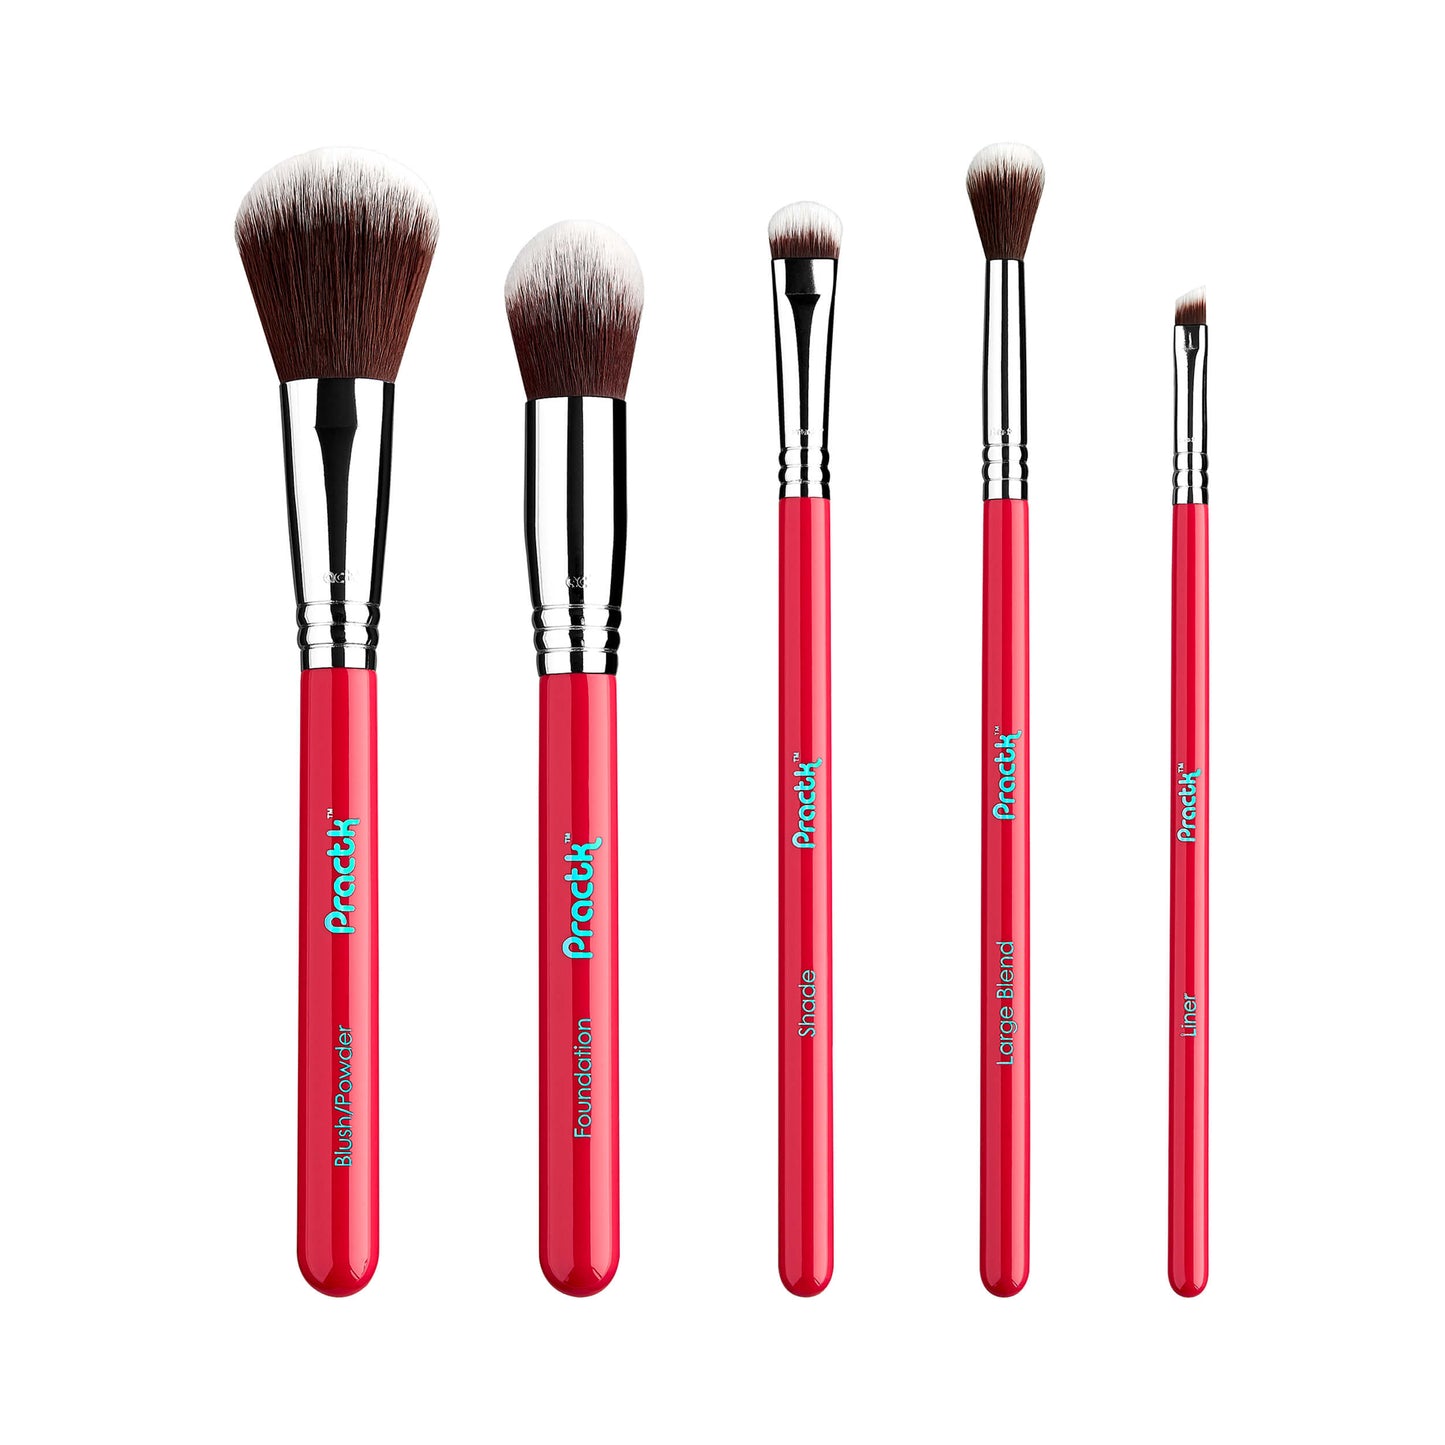 Practk (by Sigma Beauty) - All-Star Brush Set